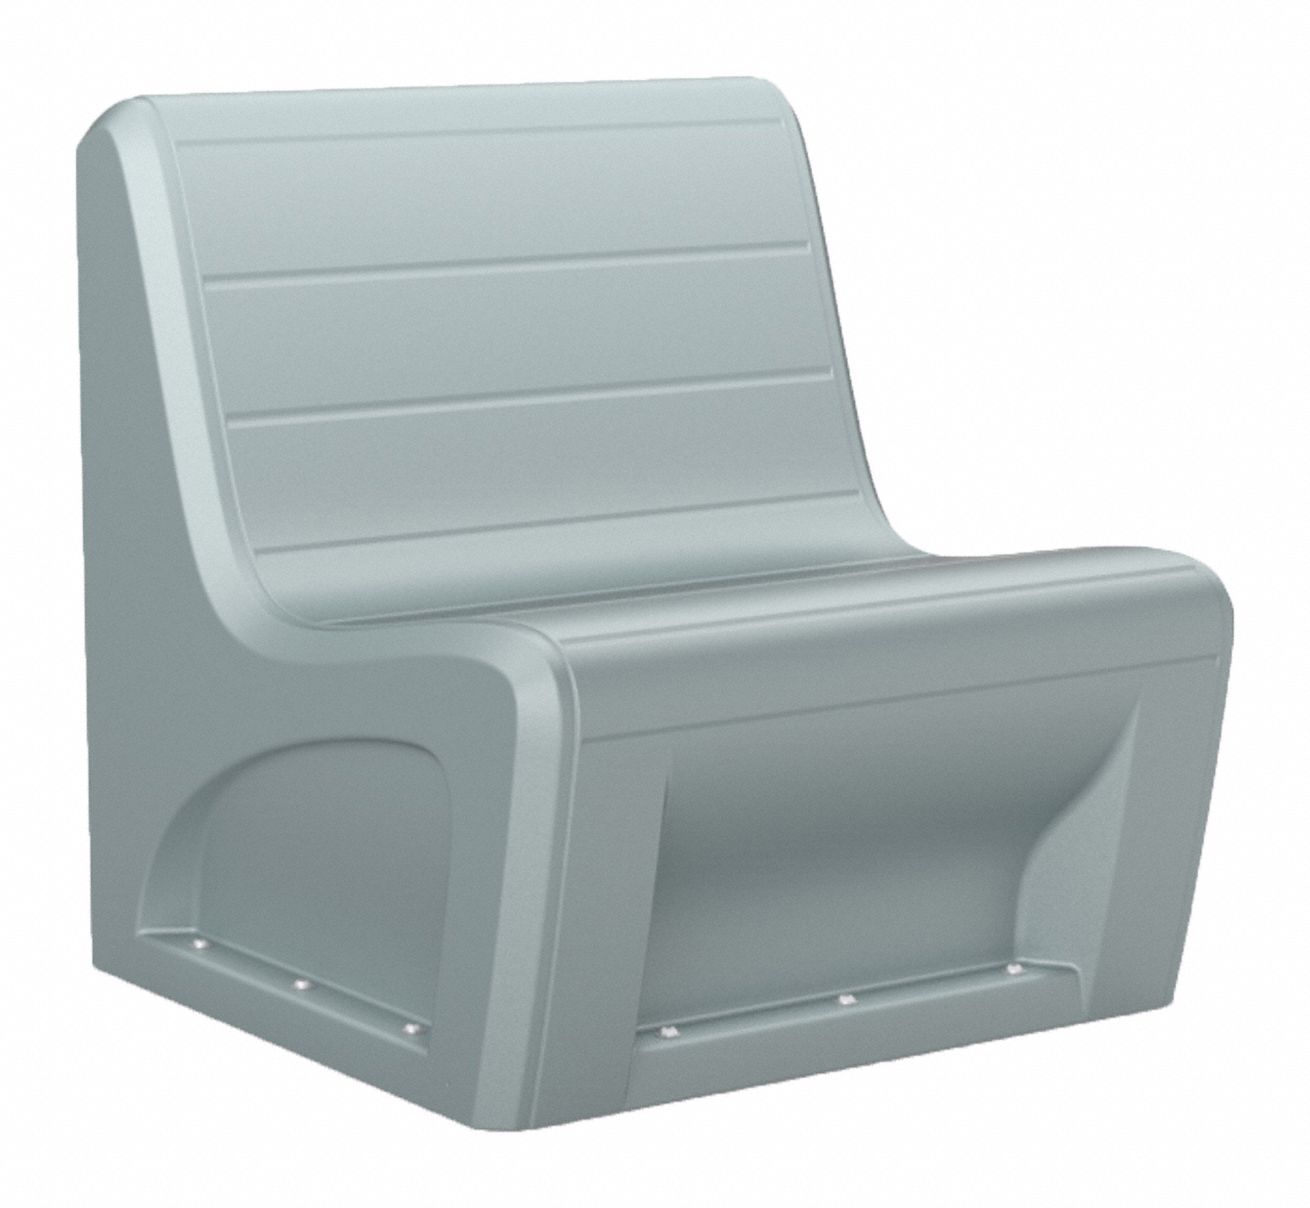 Sabre Sectional Chair w/Sand Port Gray: 30 1/2 in Wd, 32 in Lg, 33 in Ht, 500 lb Wt Capacity